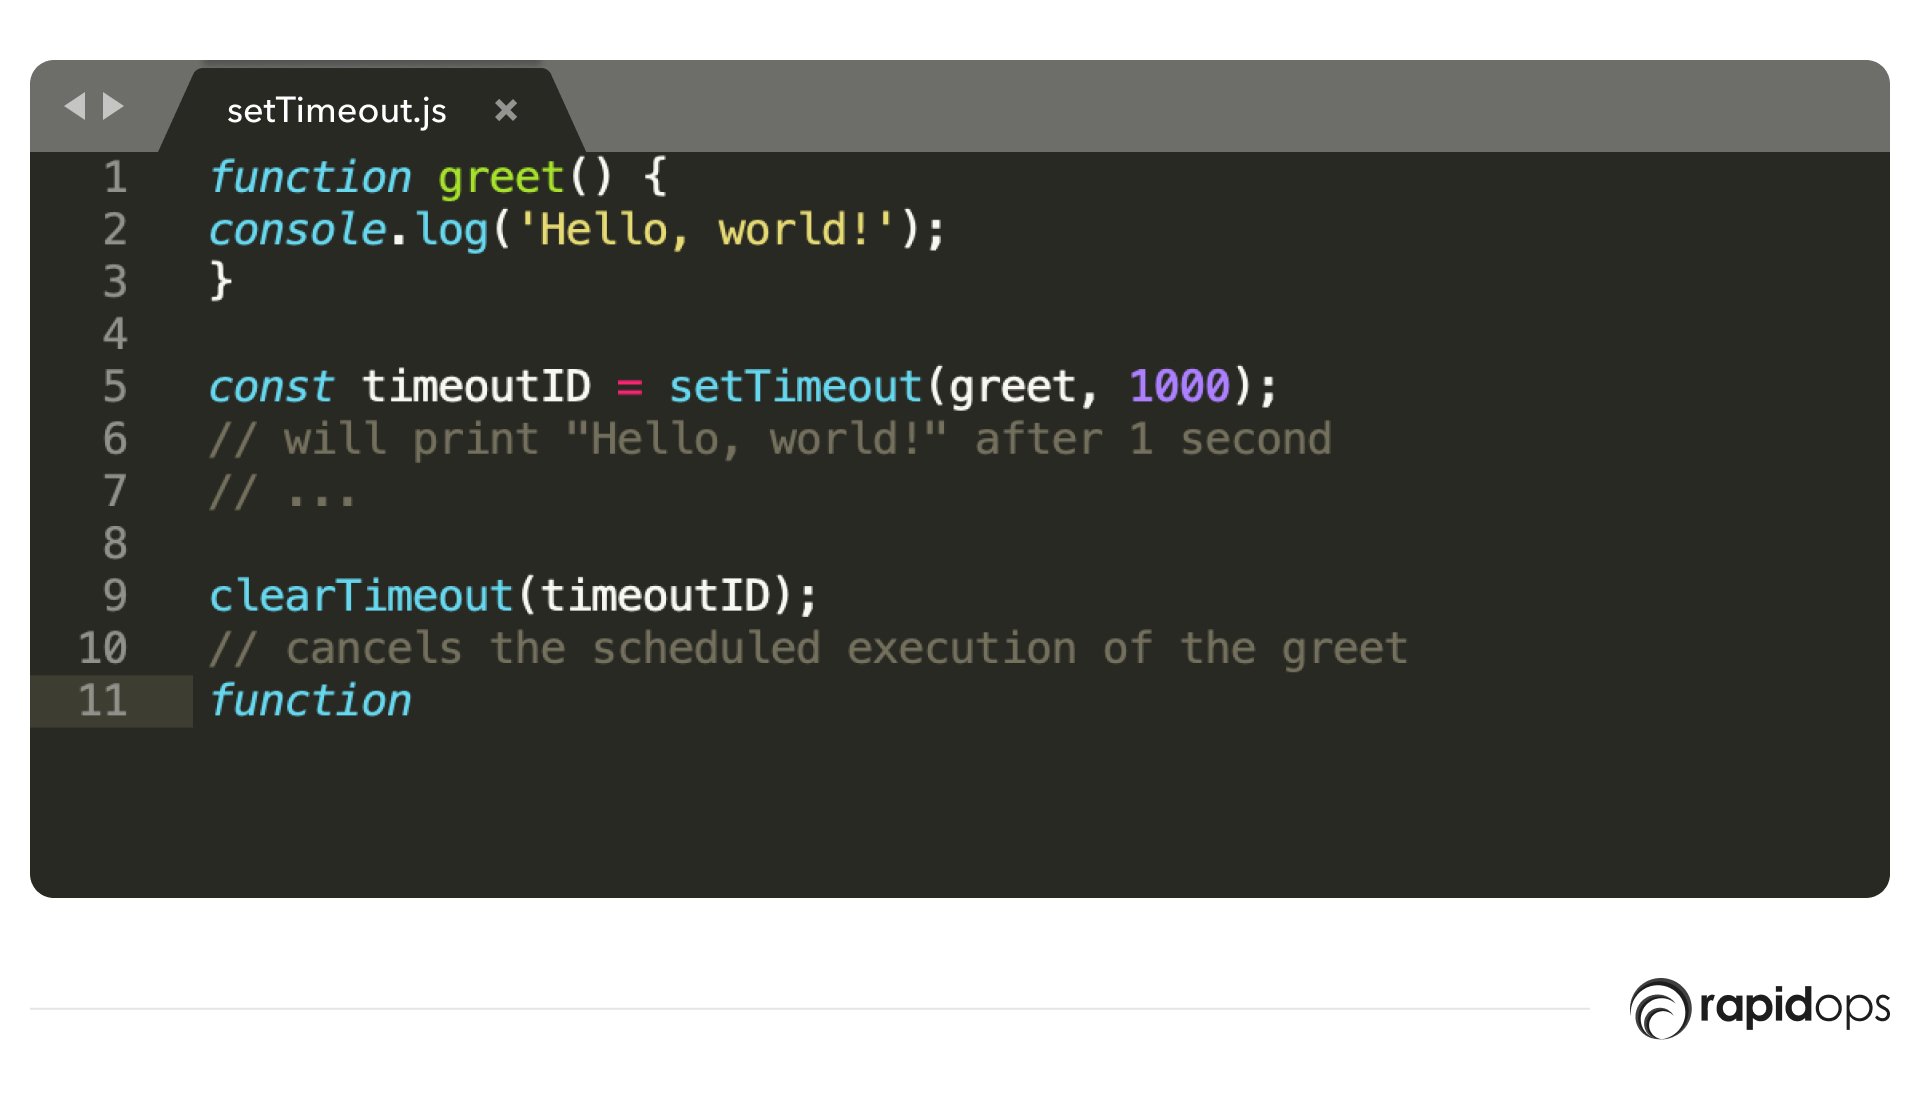 TimeoutID variable used to cancel scheduled execution of the greet